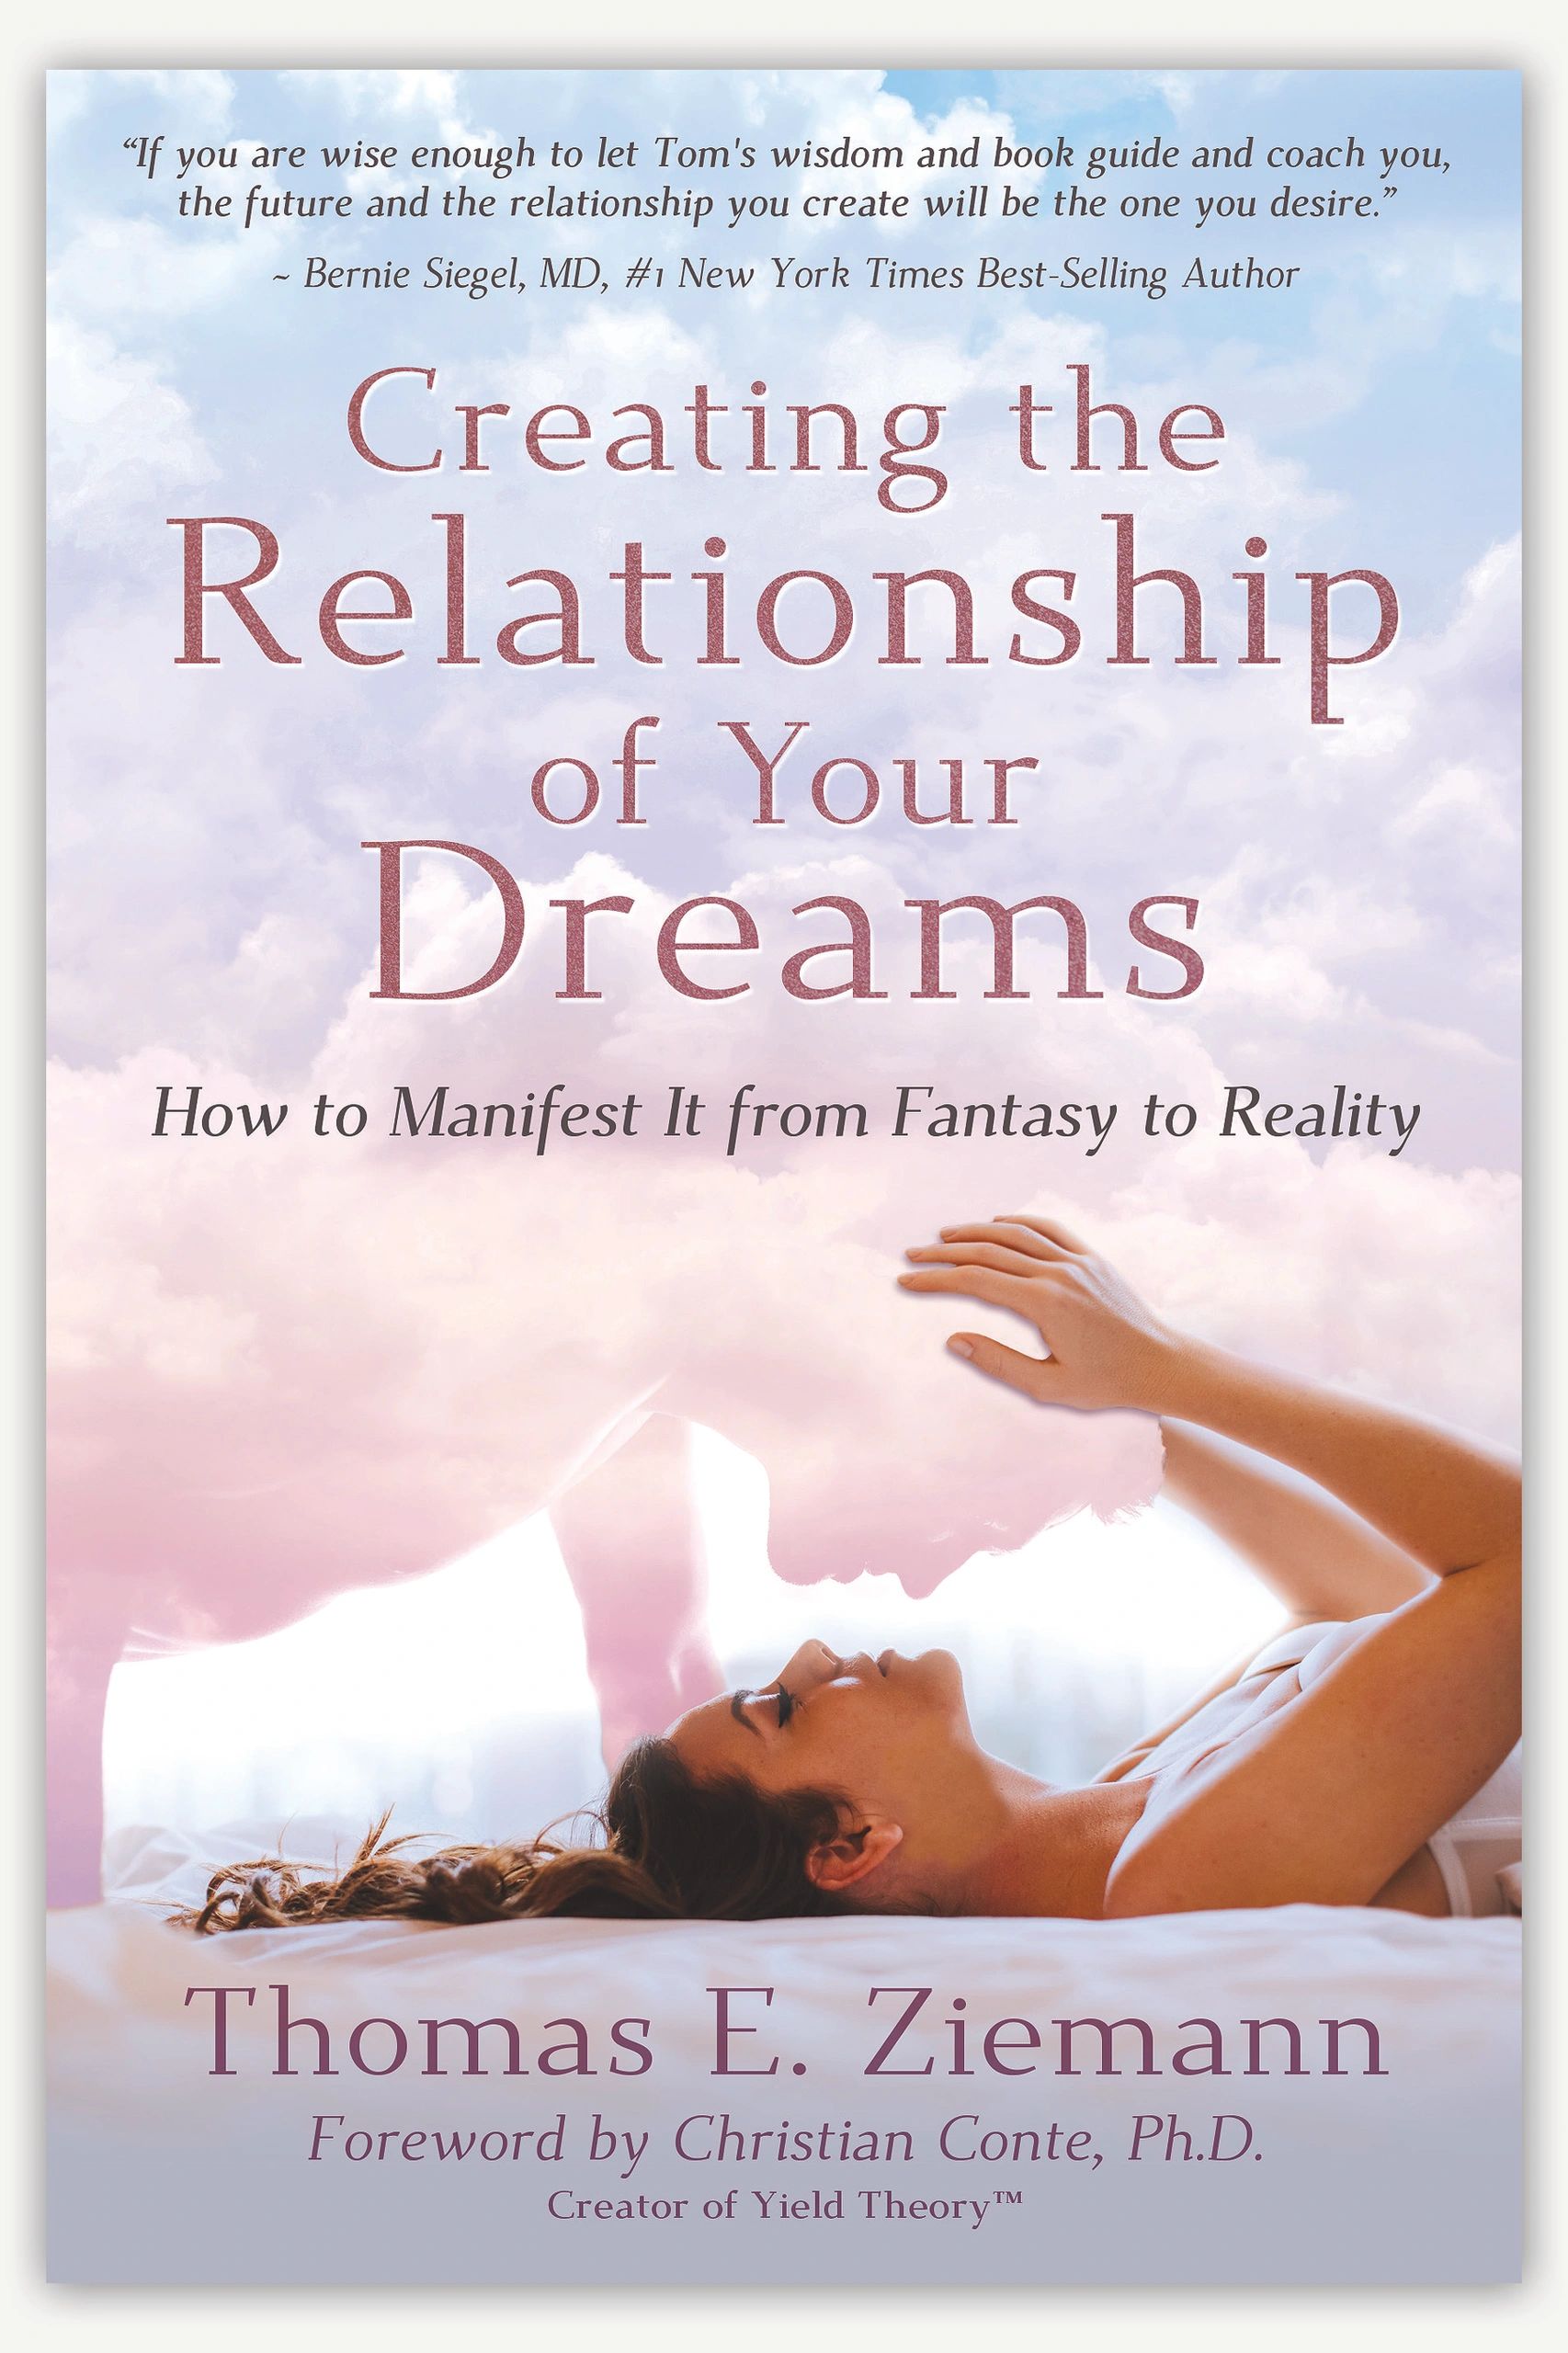 How to Manifest Your Dreams: A No-Nonsense Guide 